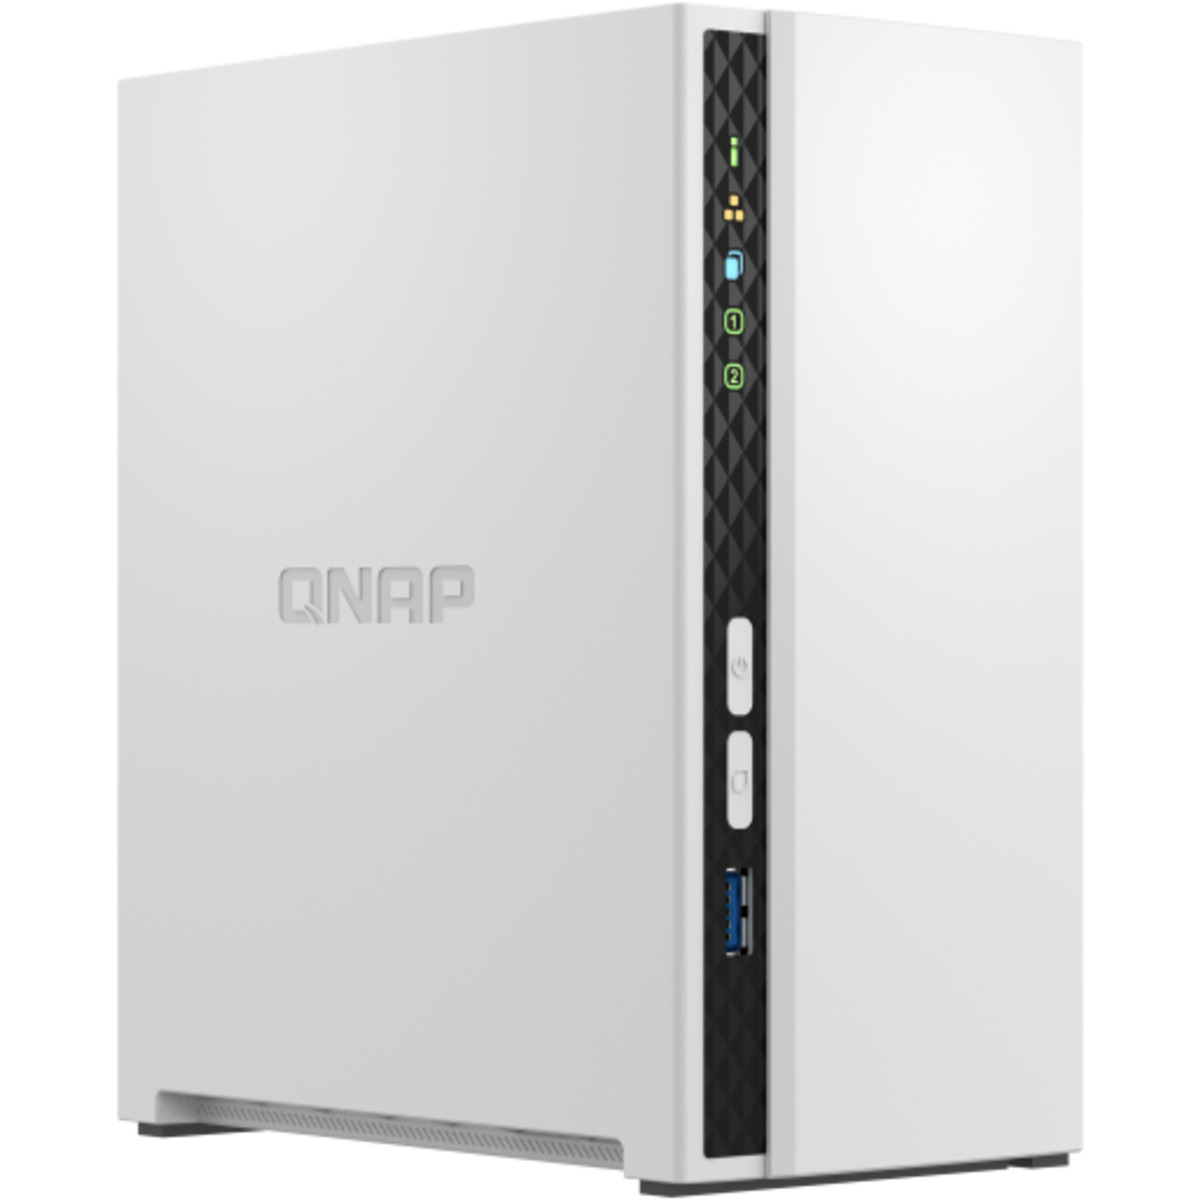 buy QNAP TS-233 8tb Desktop NAS - Network Attached Storage Device 2x4000gb Seagate BarraCuda ST4000DM004 3.5 7200rpm SATA 6Gb/s HDD CONSUMER Class Drives Installed - Burn-In Tested - nas headquarters buy network attached storage server device das new raid-5 free shipping usa spring sale TS-233